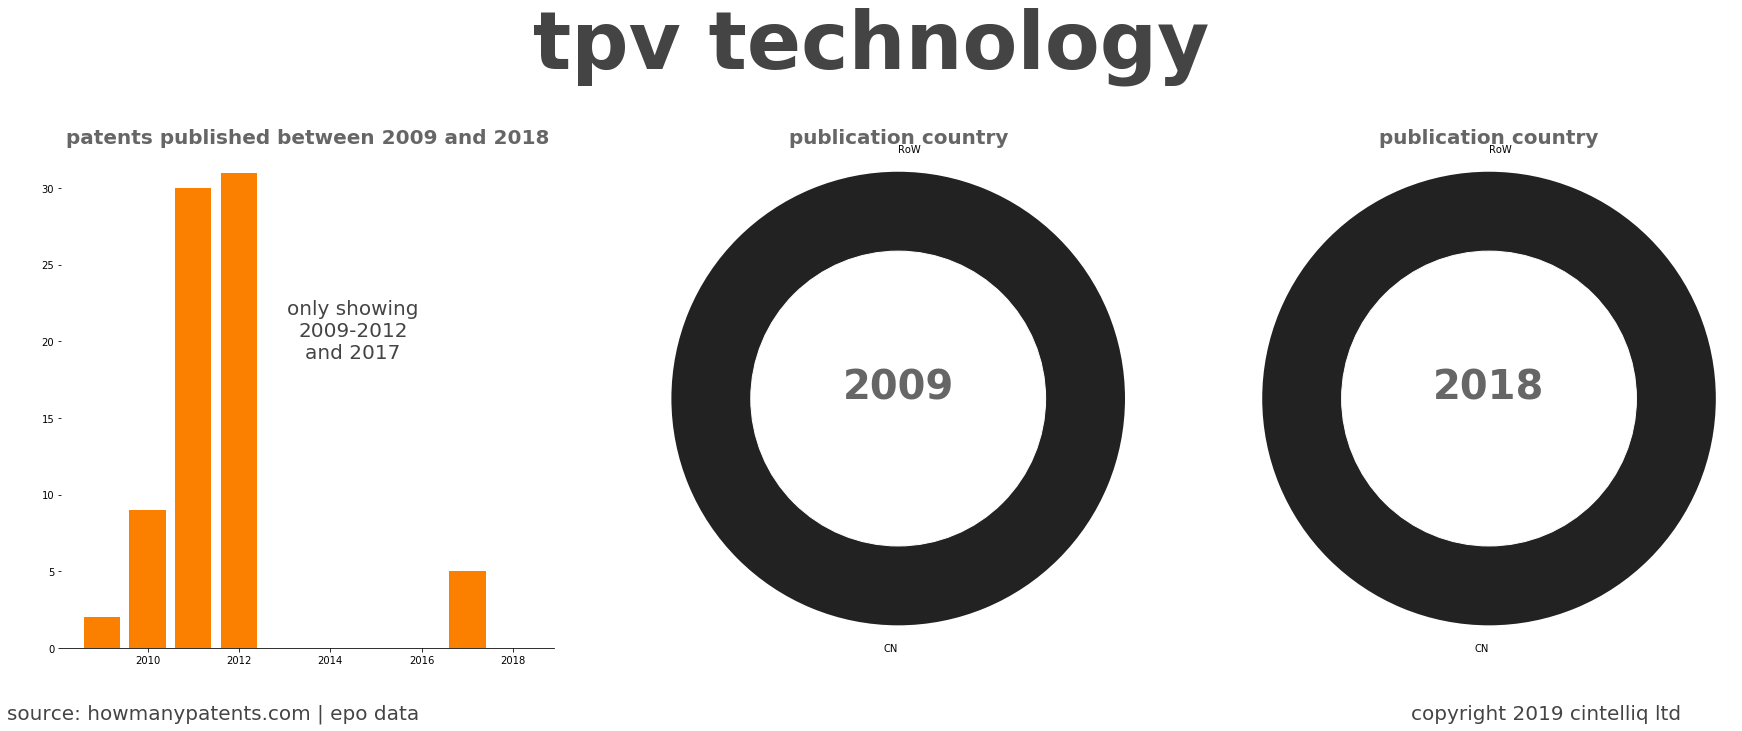 summary of patents for Tpv Technology